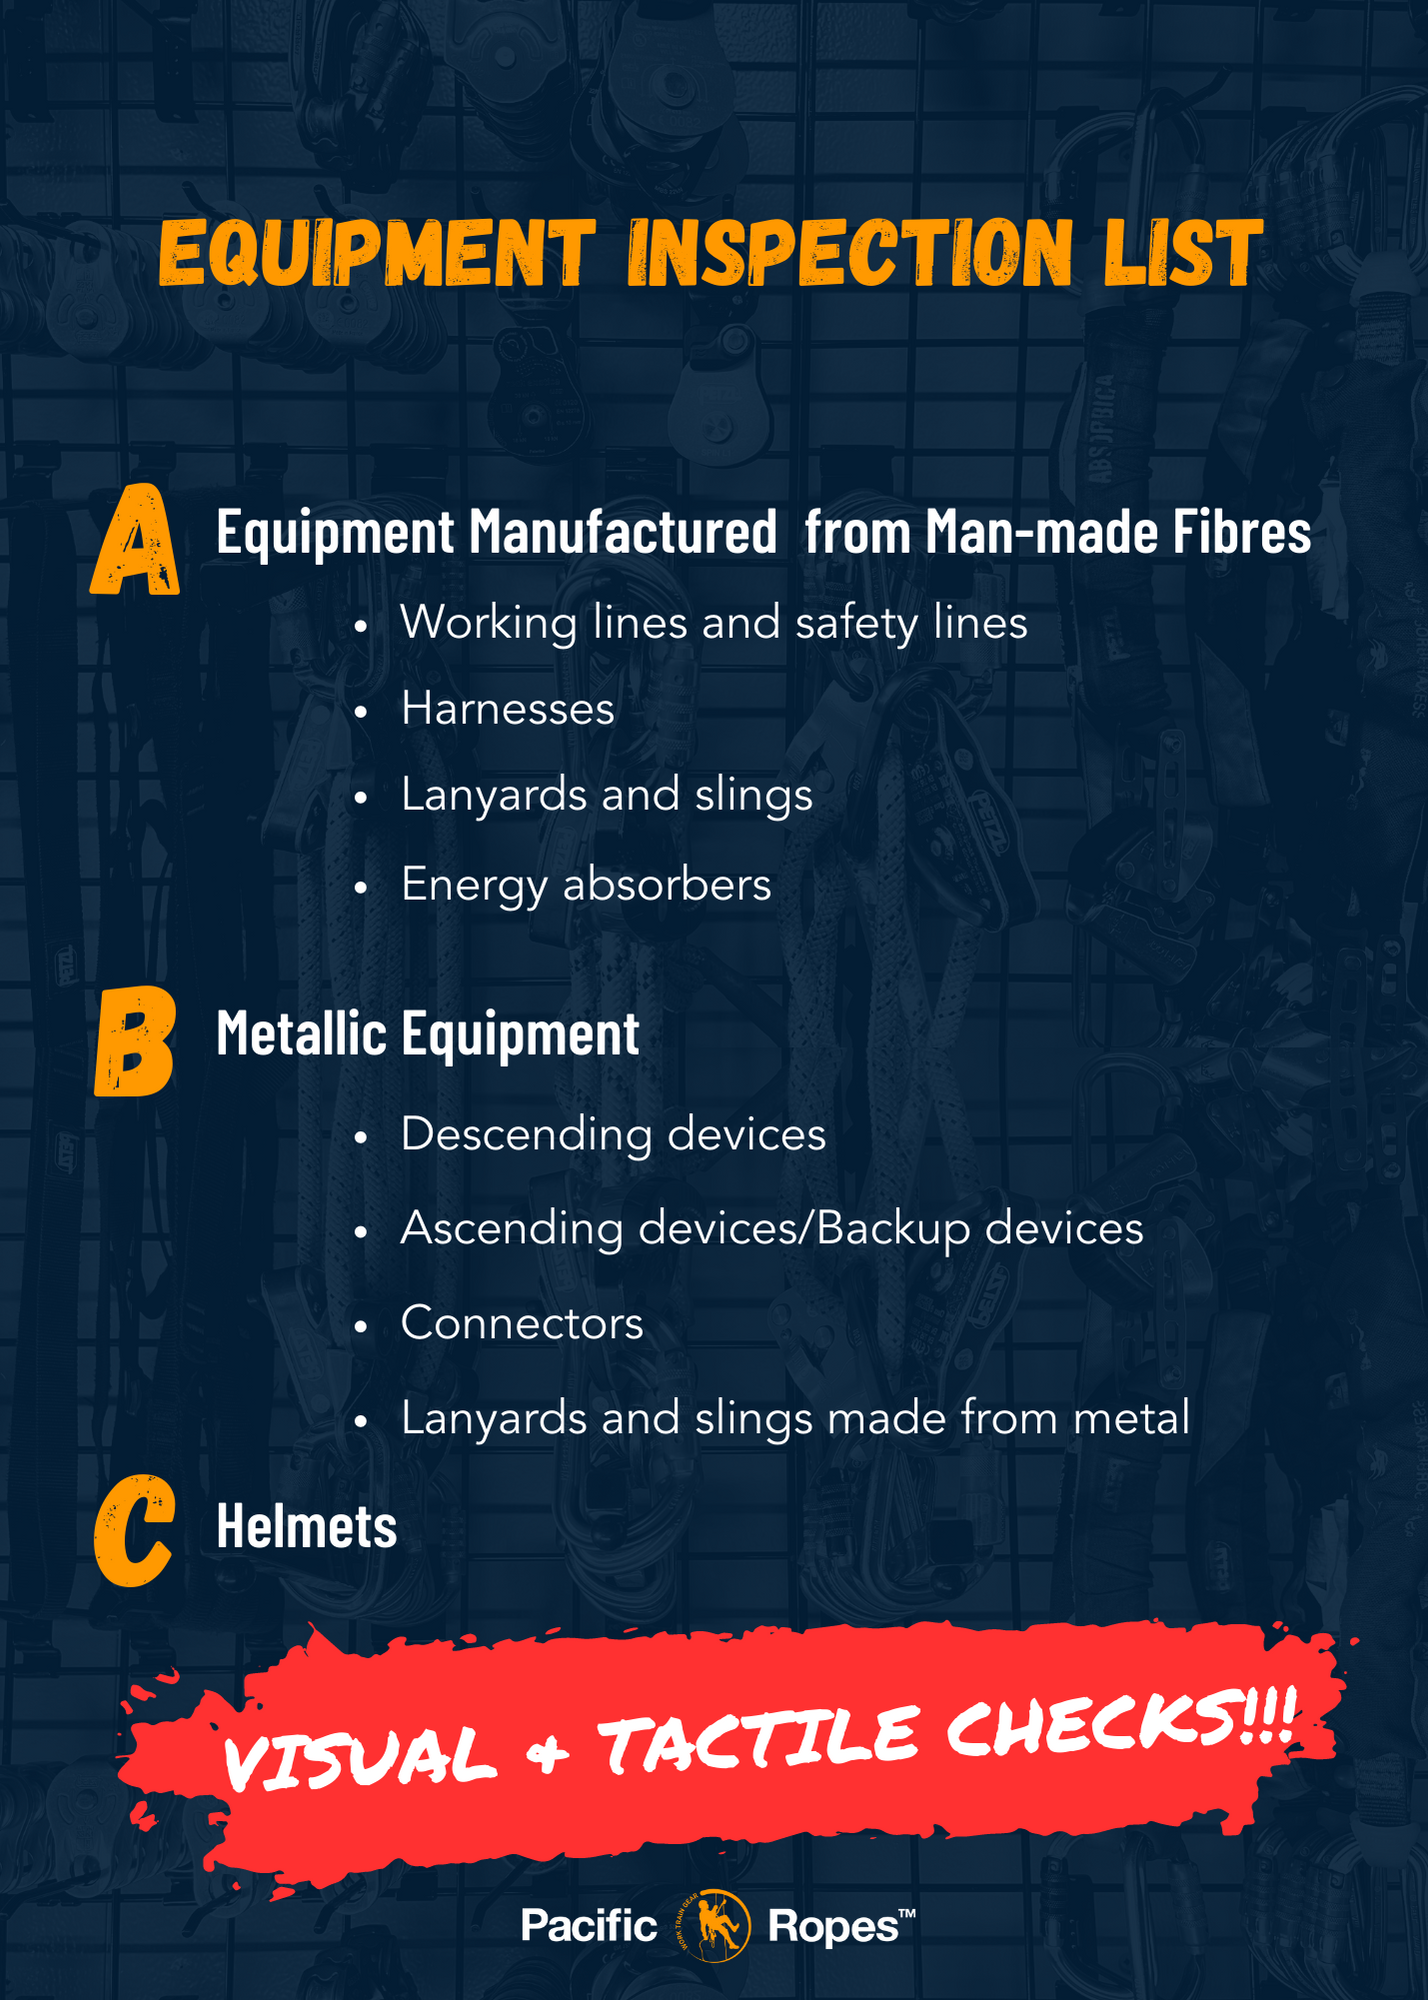 How Should I Inspect My Rope Access Equipment?